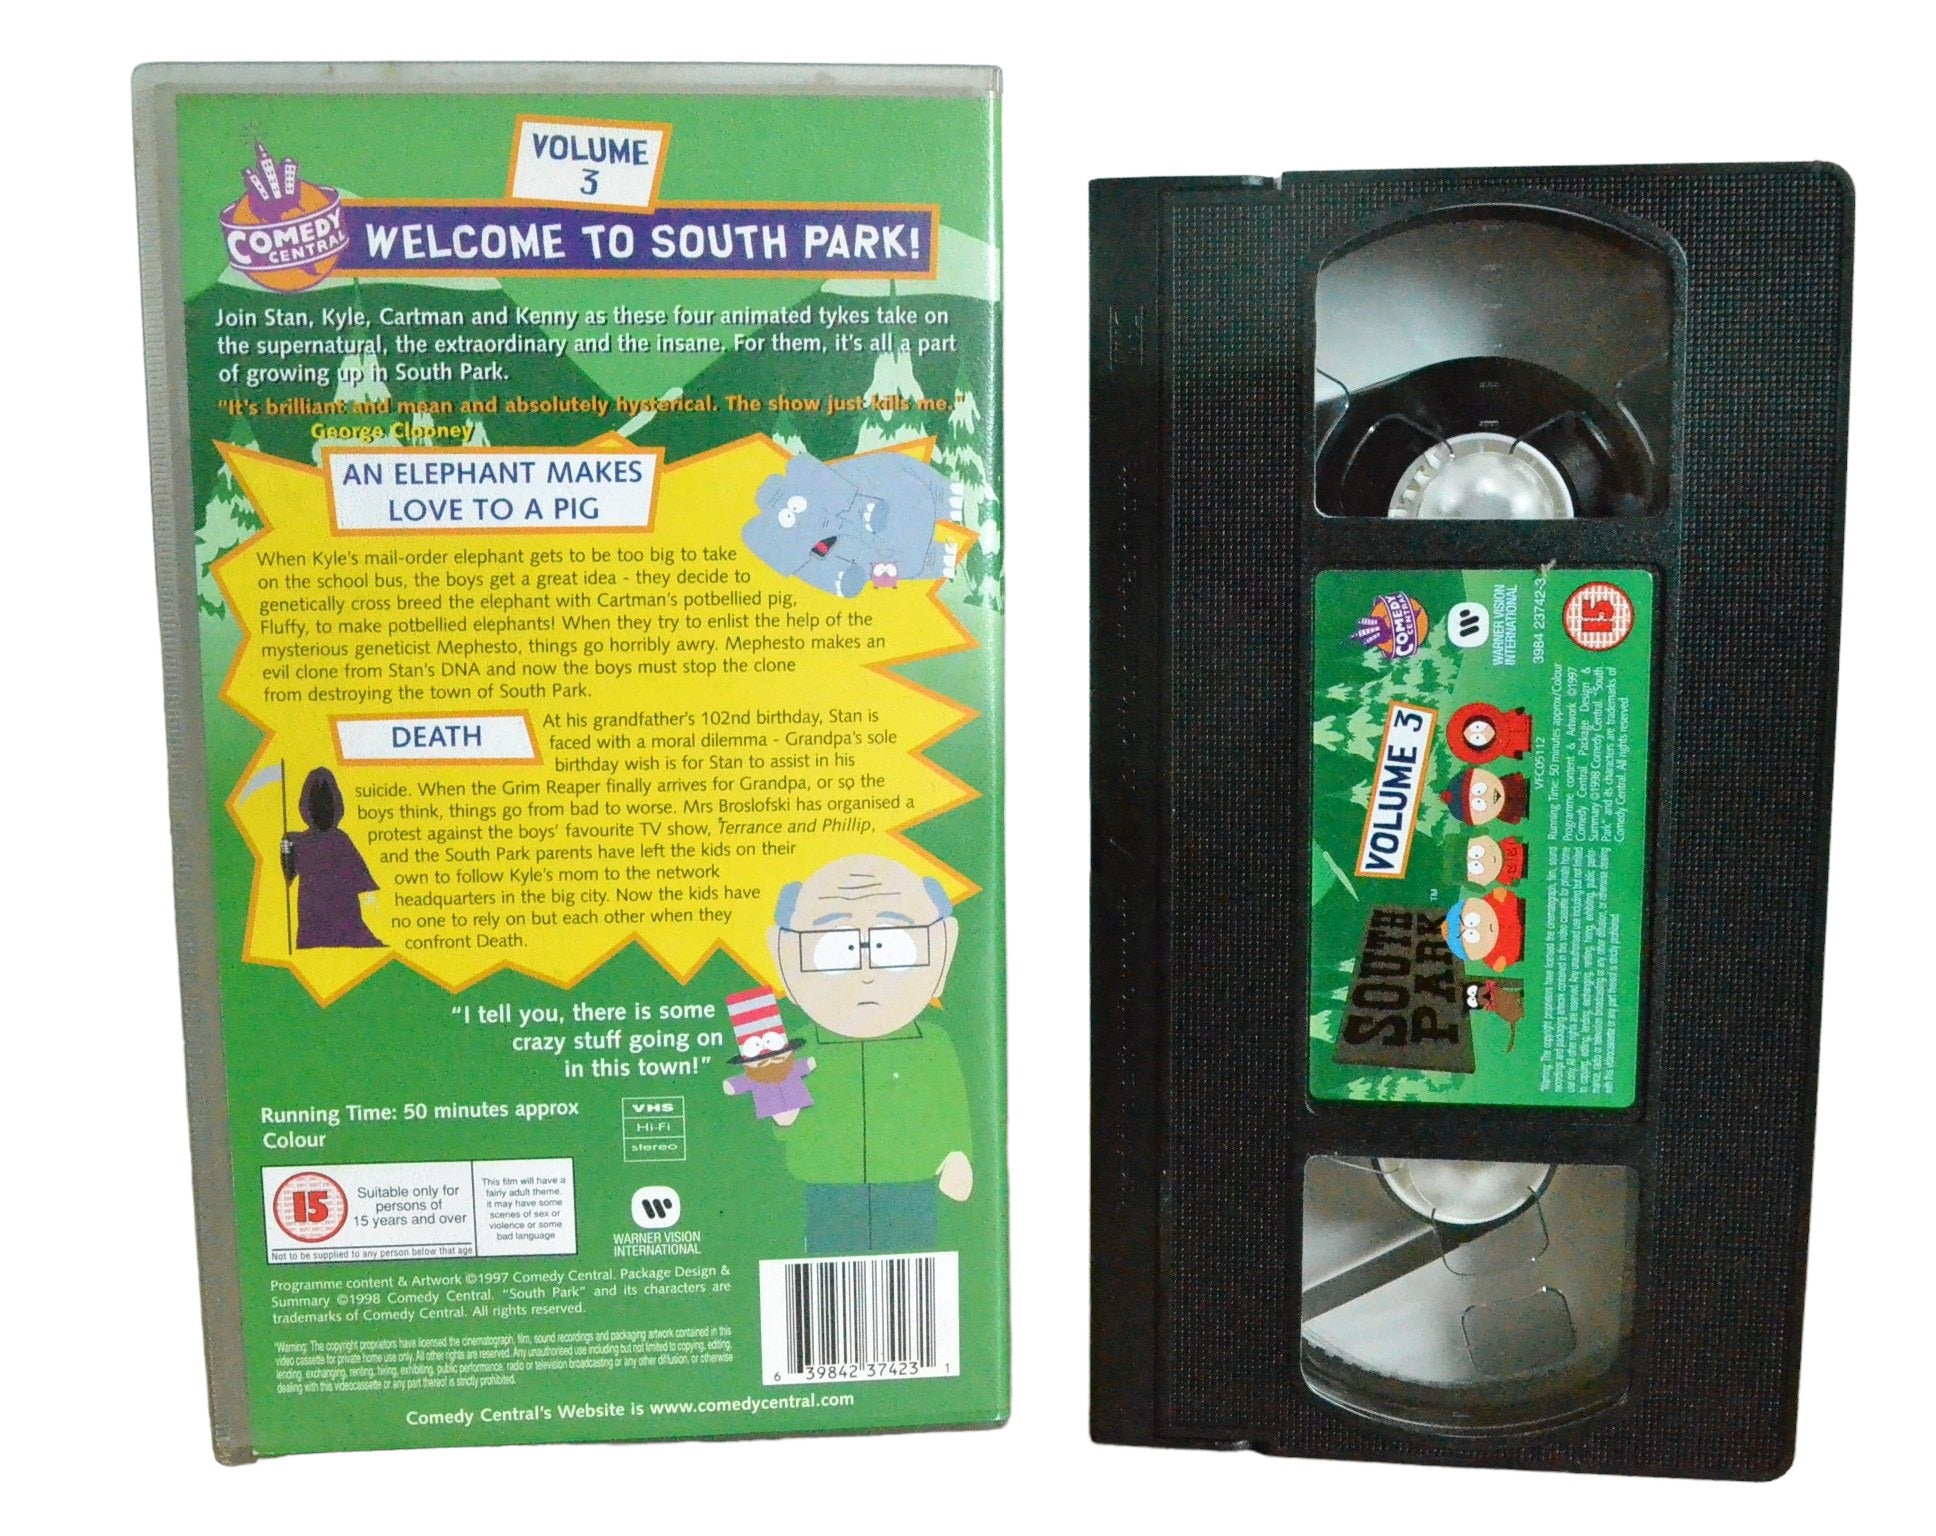 South Park : Volume 3 (An Elephant Makes Love To A Pig / Death) - Warner Vision Entertainment - 3984237423 - Comedy - Pal - VHS-